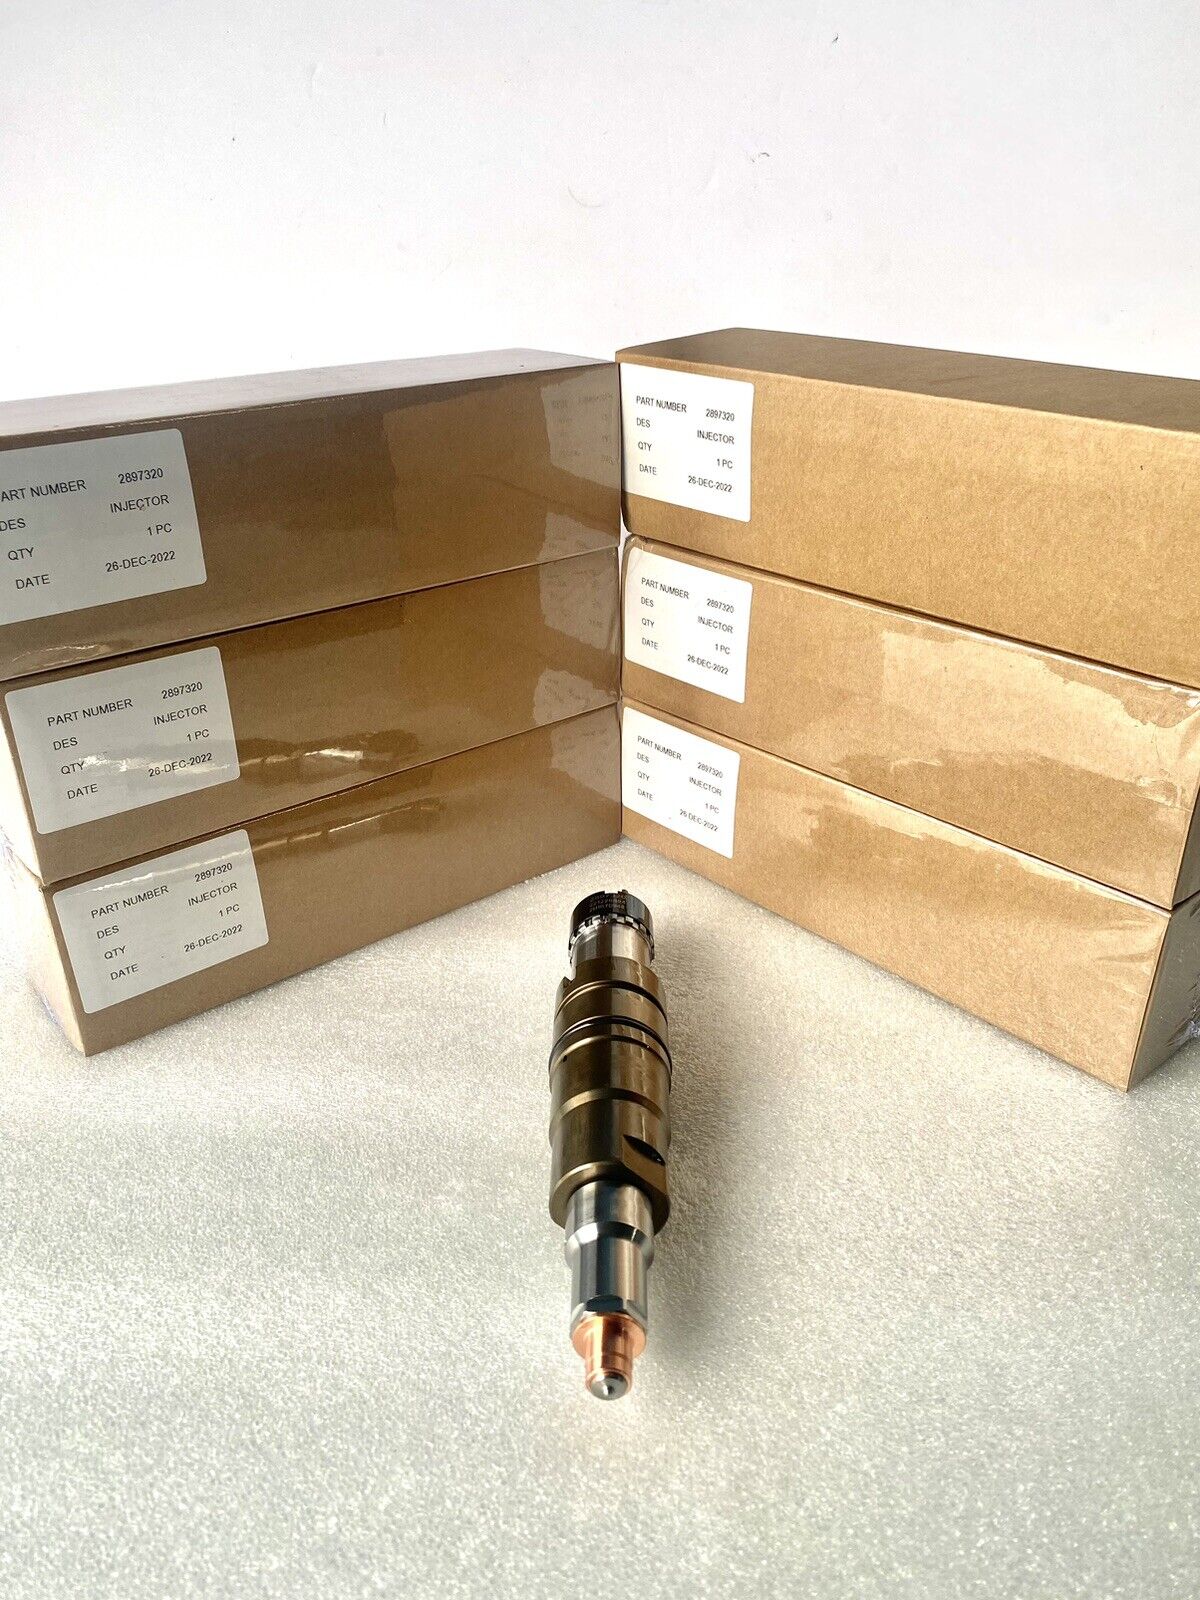 OEM CUMMINS ISX15 INJECTOR 2897320, 5579419 SUPERCED 2897320PX WITH TEST REPORT